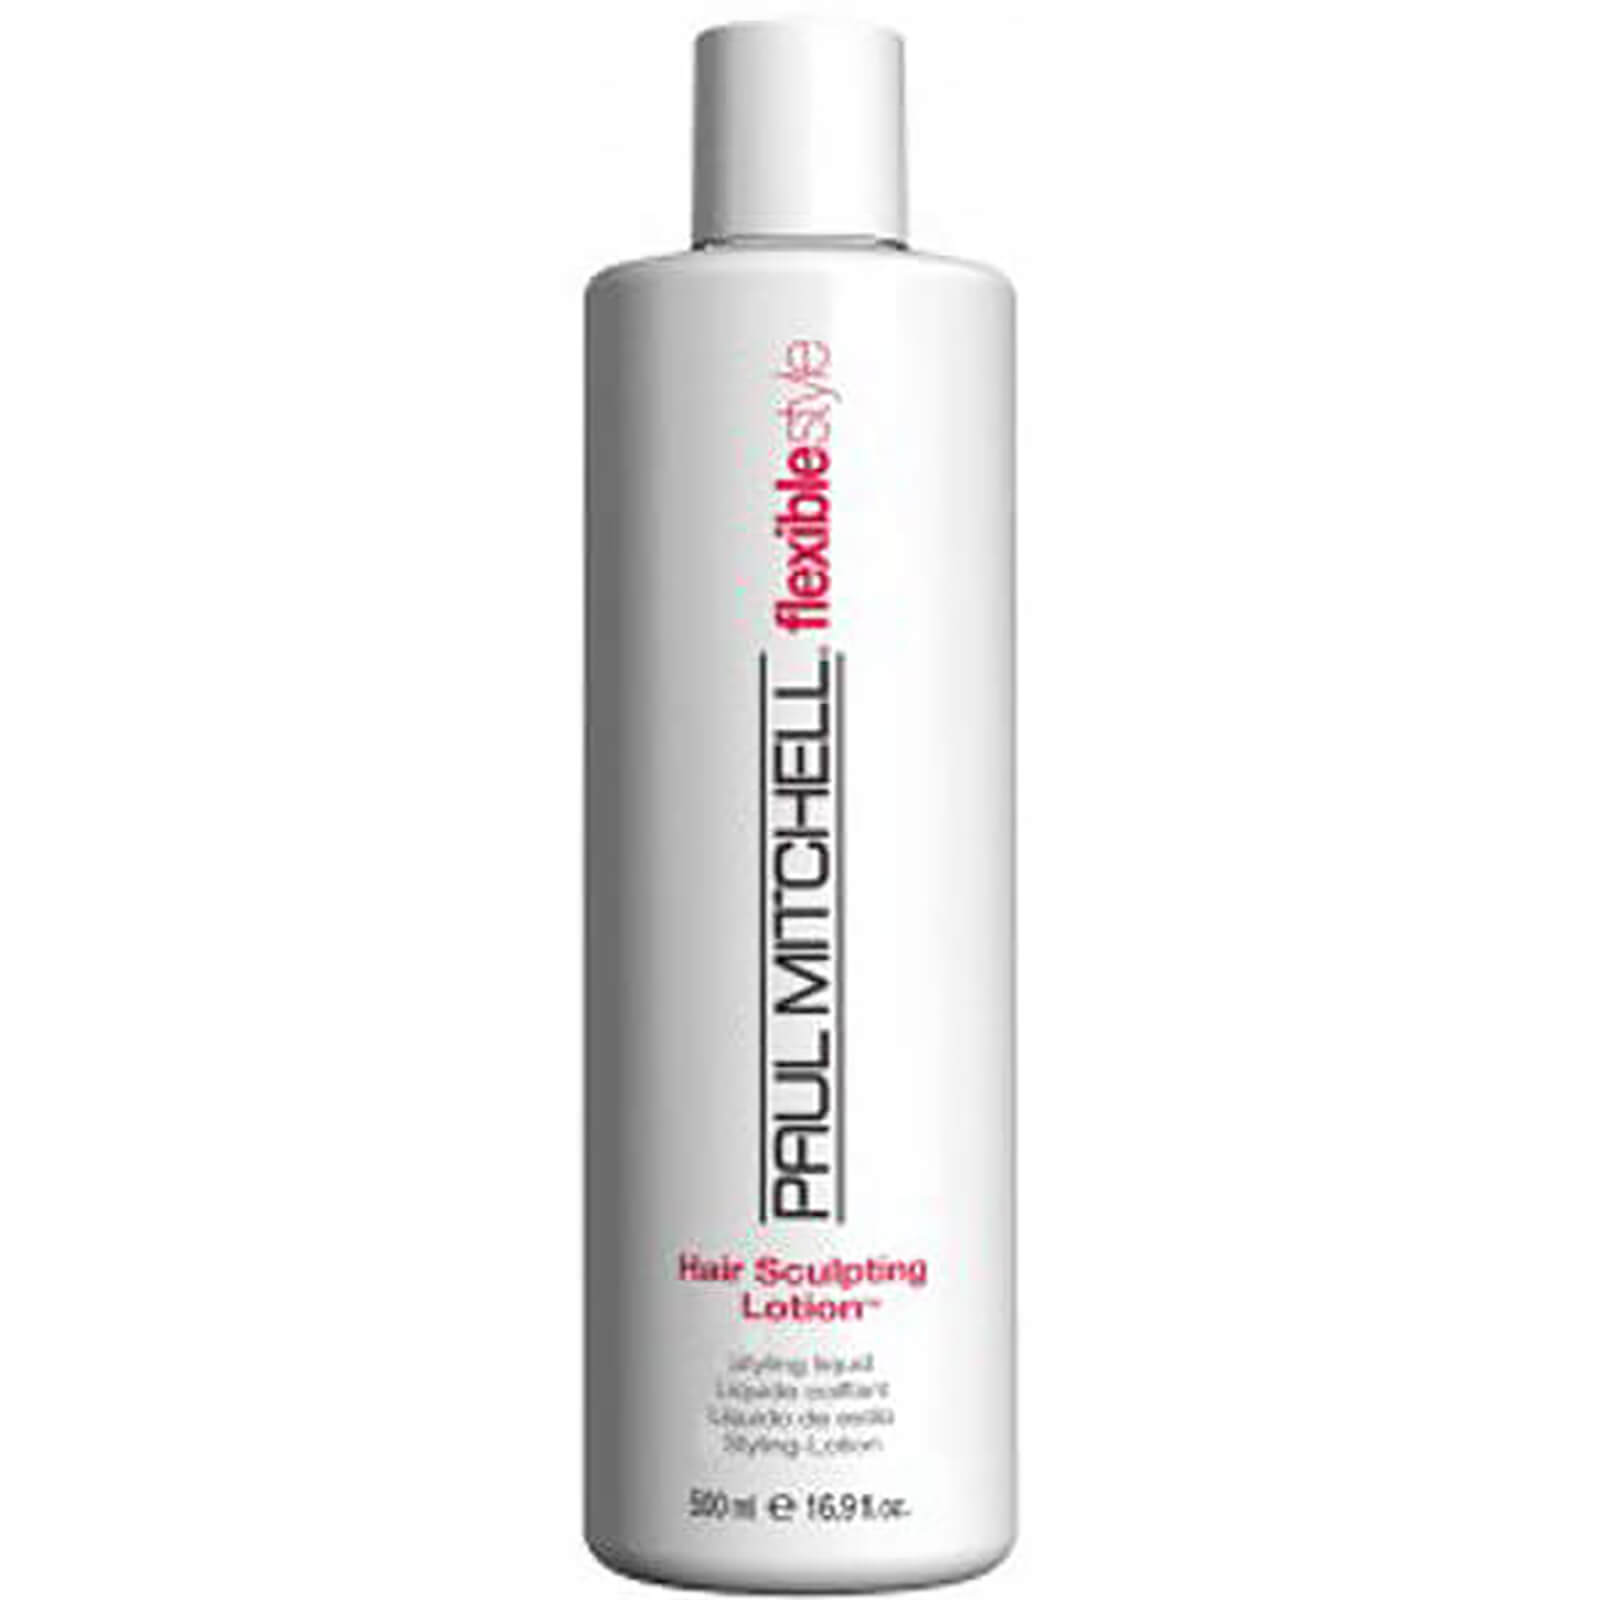 Image of Paul Mitchell Hair Sculpting Lotion (500ml)